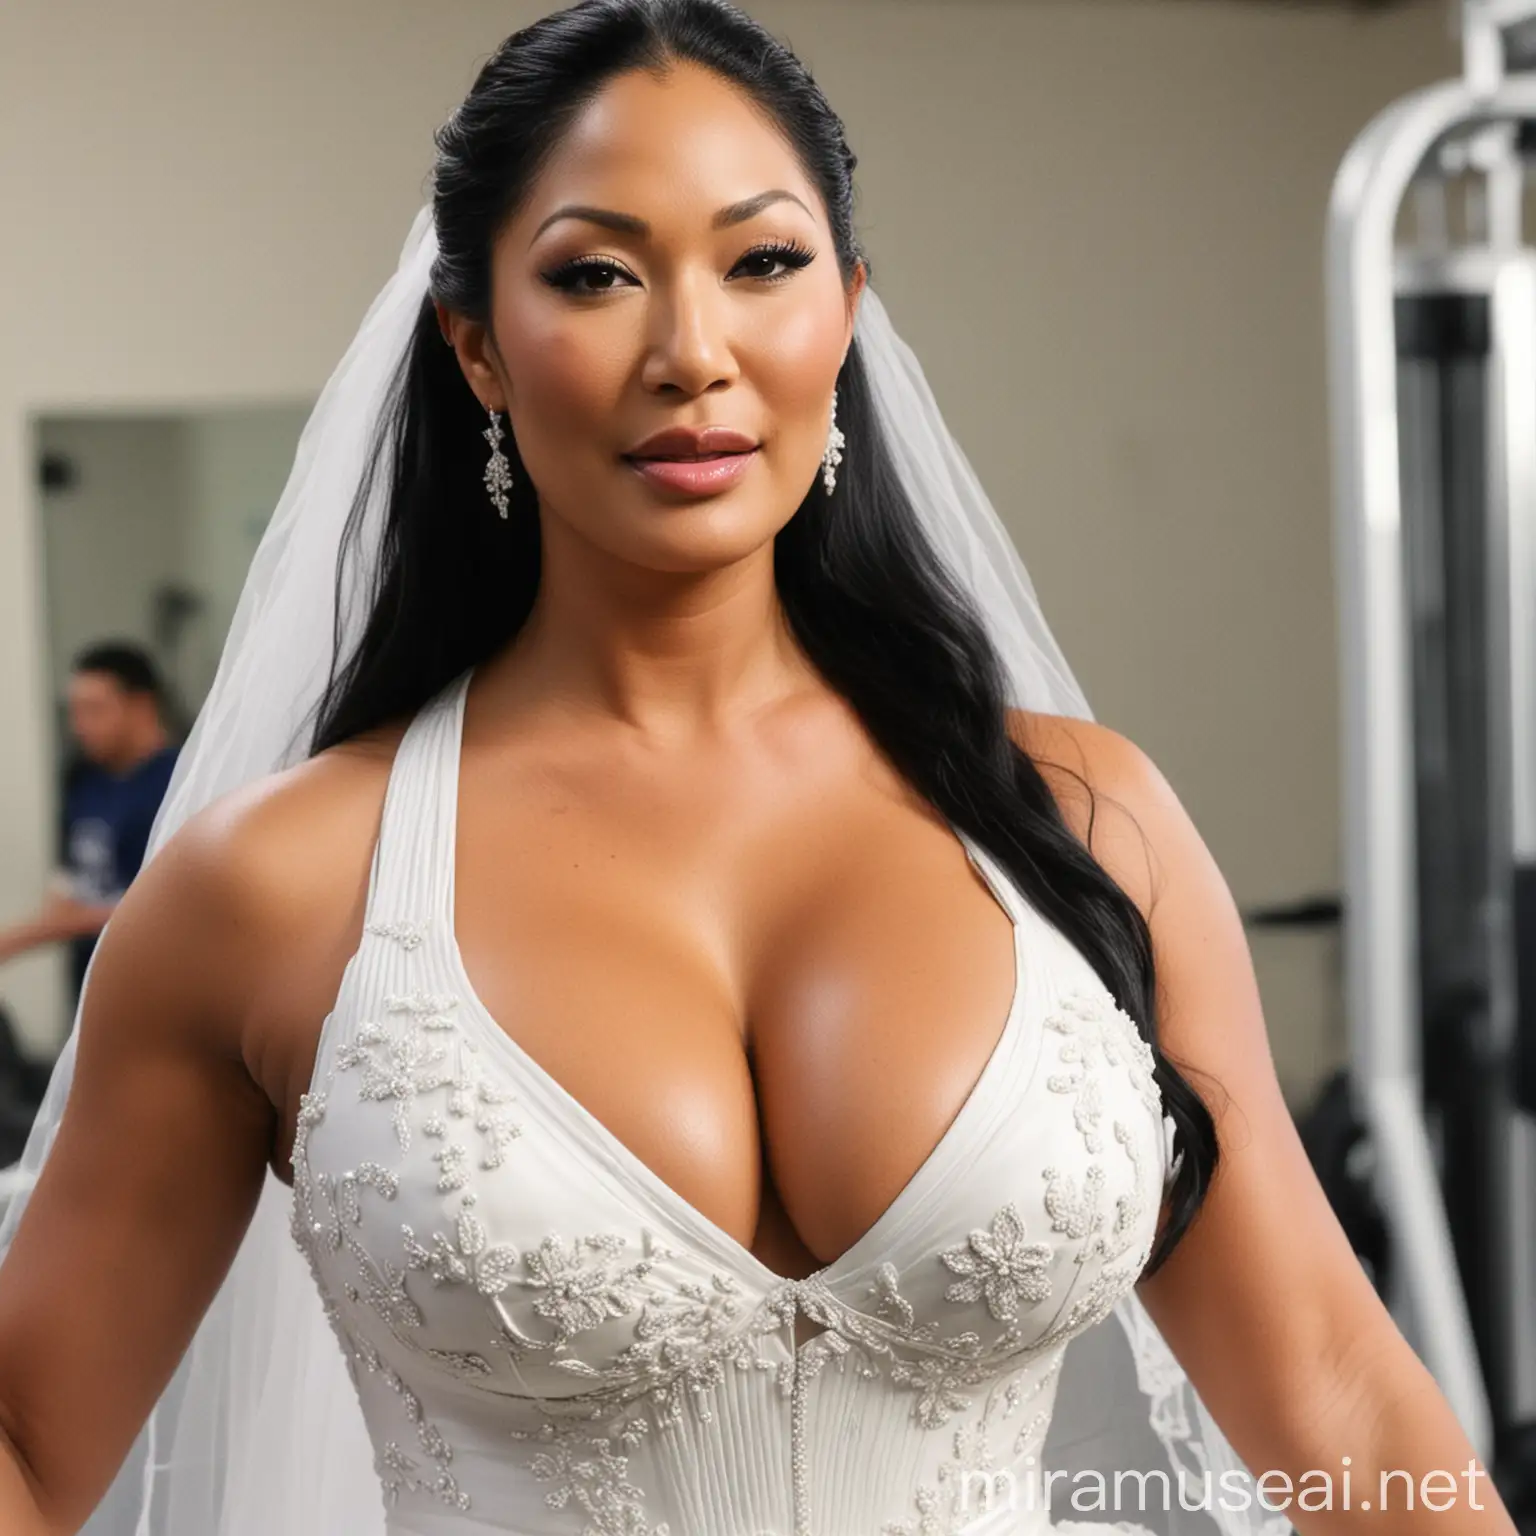 Kimora Lee Simmons wearing a wedding dress, in the gym, bbw, giant breasts, showing cleavage, zoomed in close from the waist up